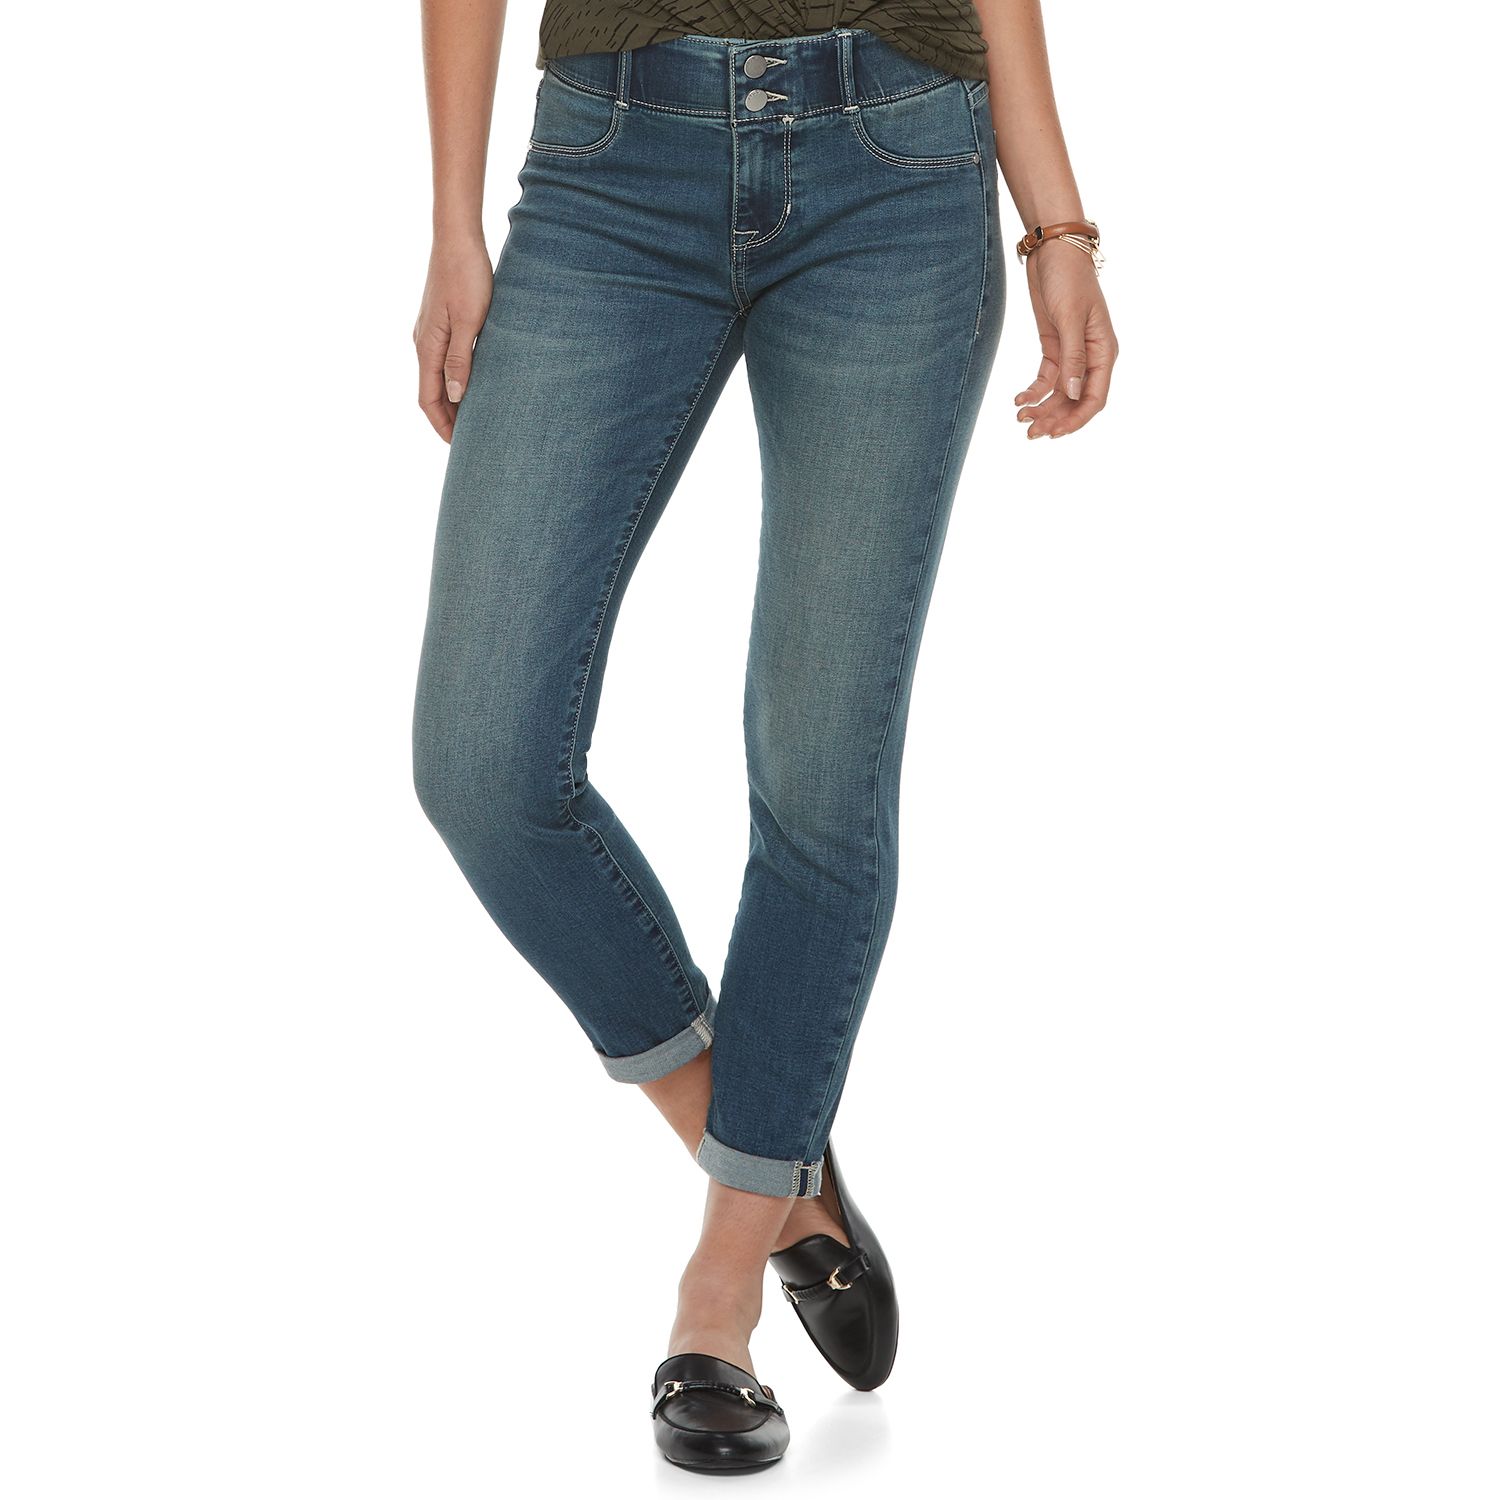 correct length for women's jeans